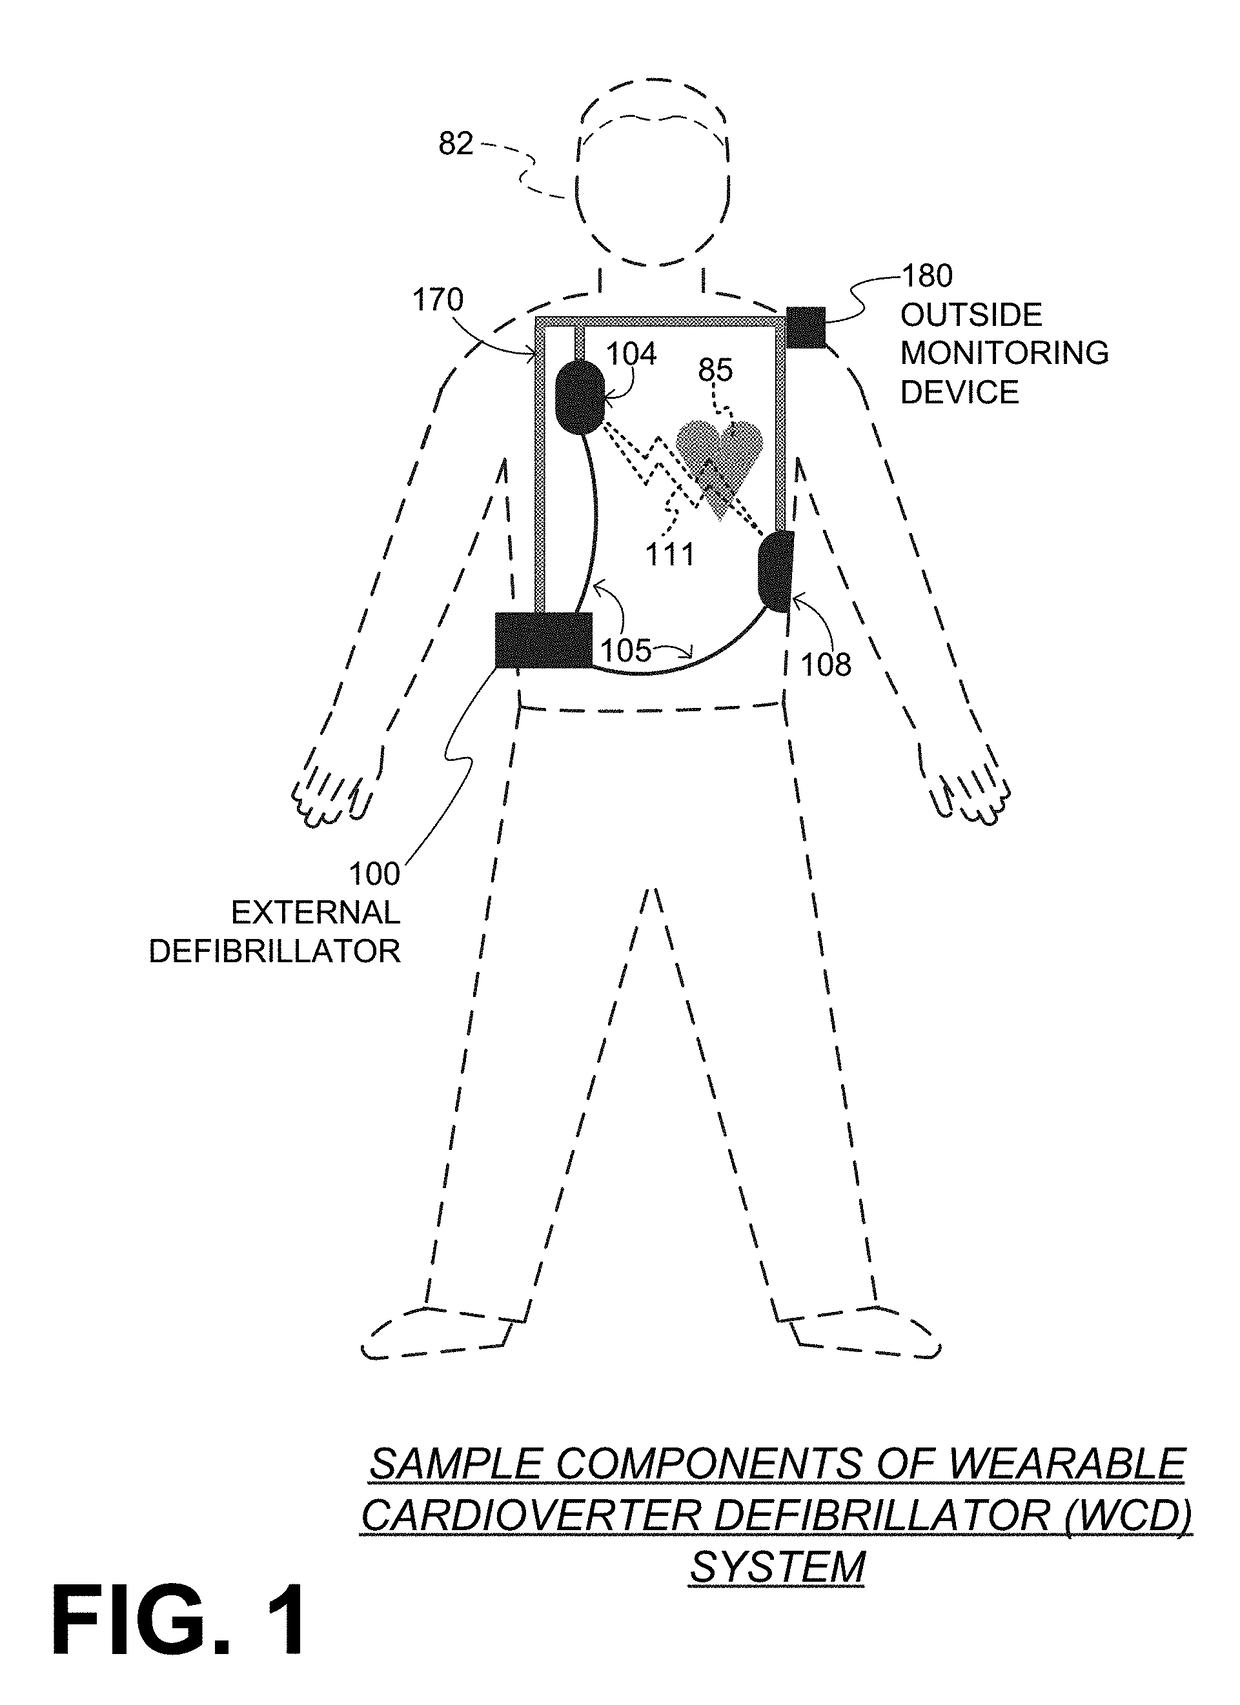 Wearable cardioverter defibrillator (WCD) causing patient's QRS width to be plotted against the heart rate